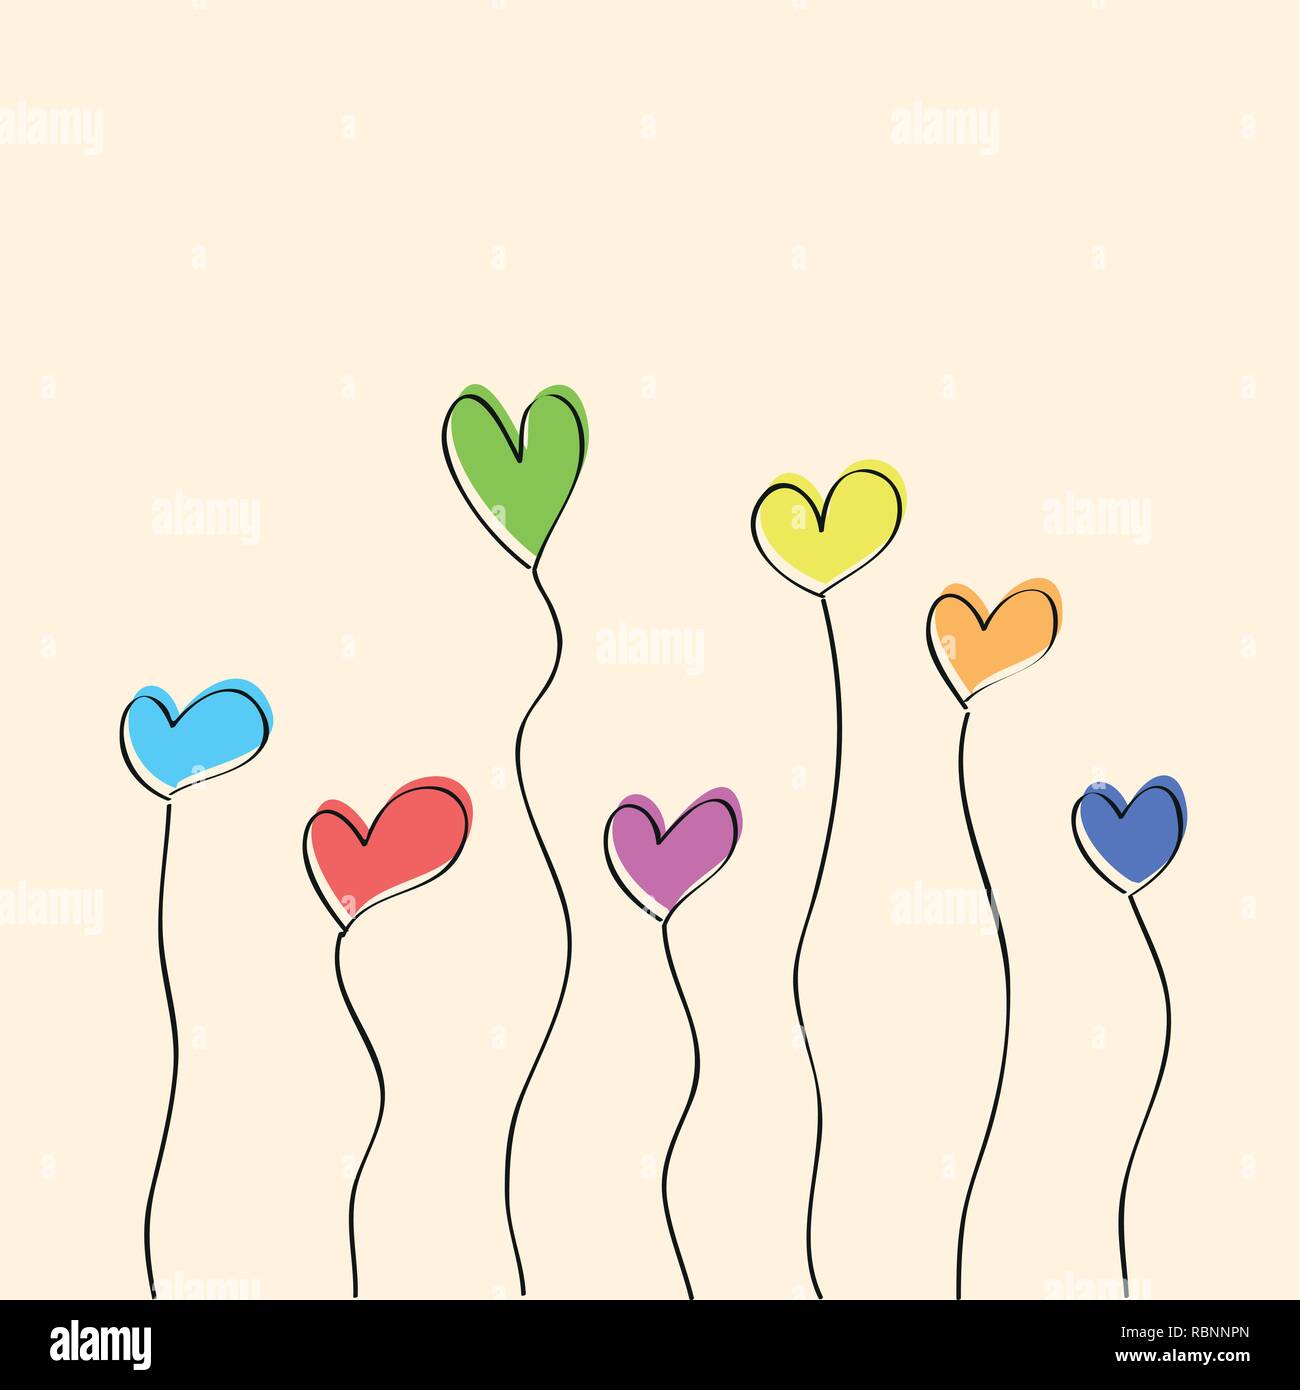 colorful hearts simple drawing for wedding and valentines day vector illustration EPS10 Stock Vector